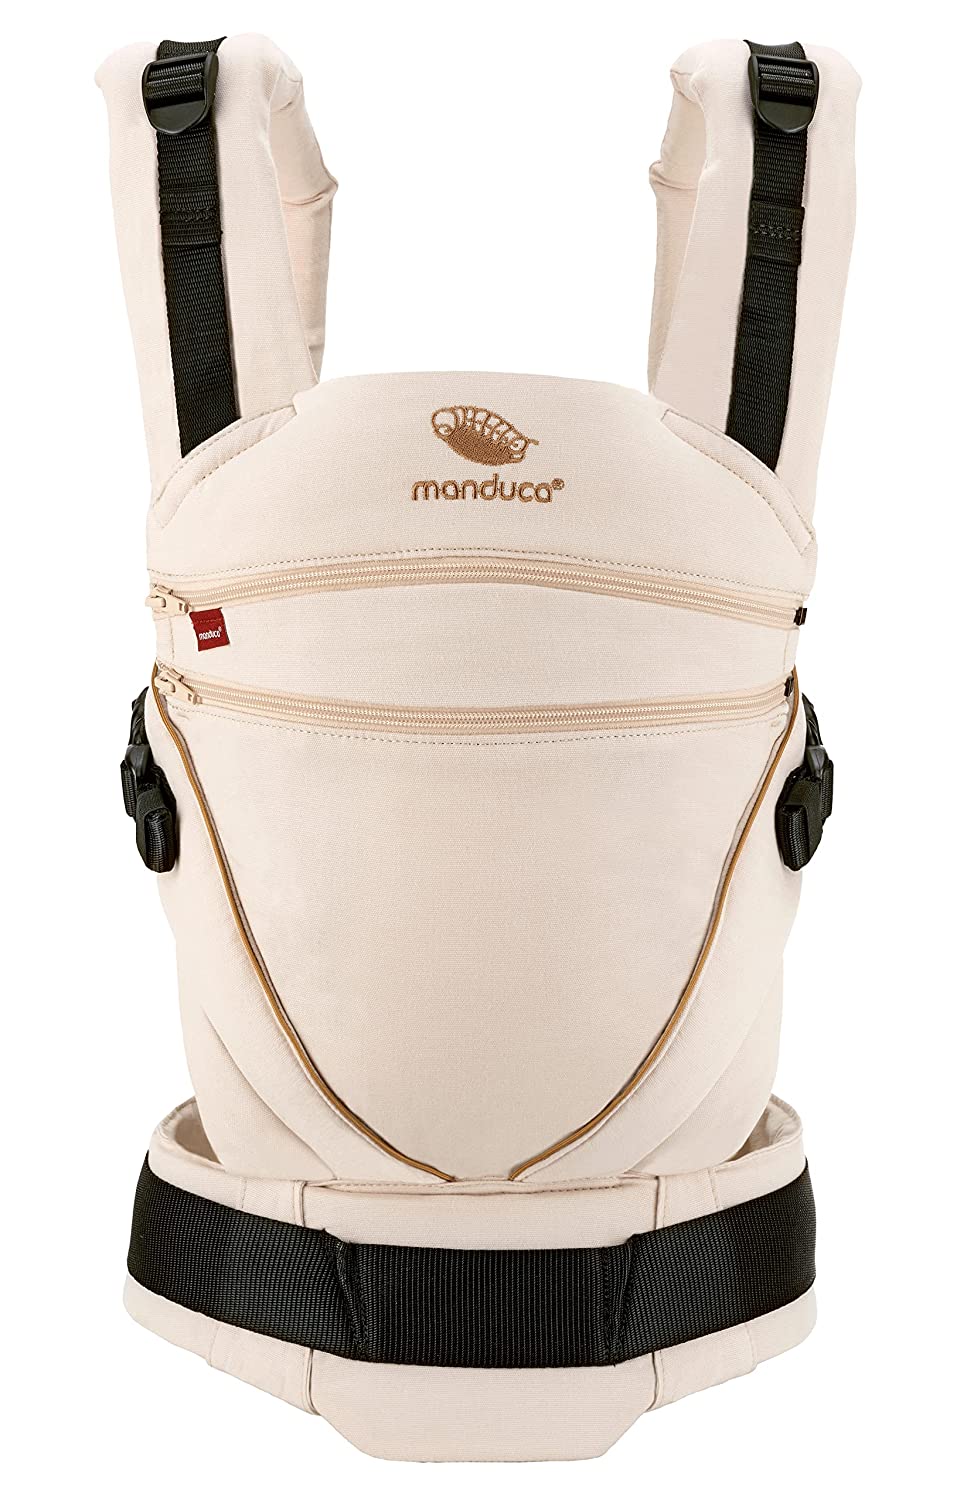 manduca XT Baby Carrier < All-In-One Baby Carrier for Newborns from Birth, Babies & Toddlers (3.5-20 kg), Adjustable Seat, 3 Carrying Positions, Organic Cotton (XT Cotton, Denim Powder Toffee)